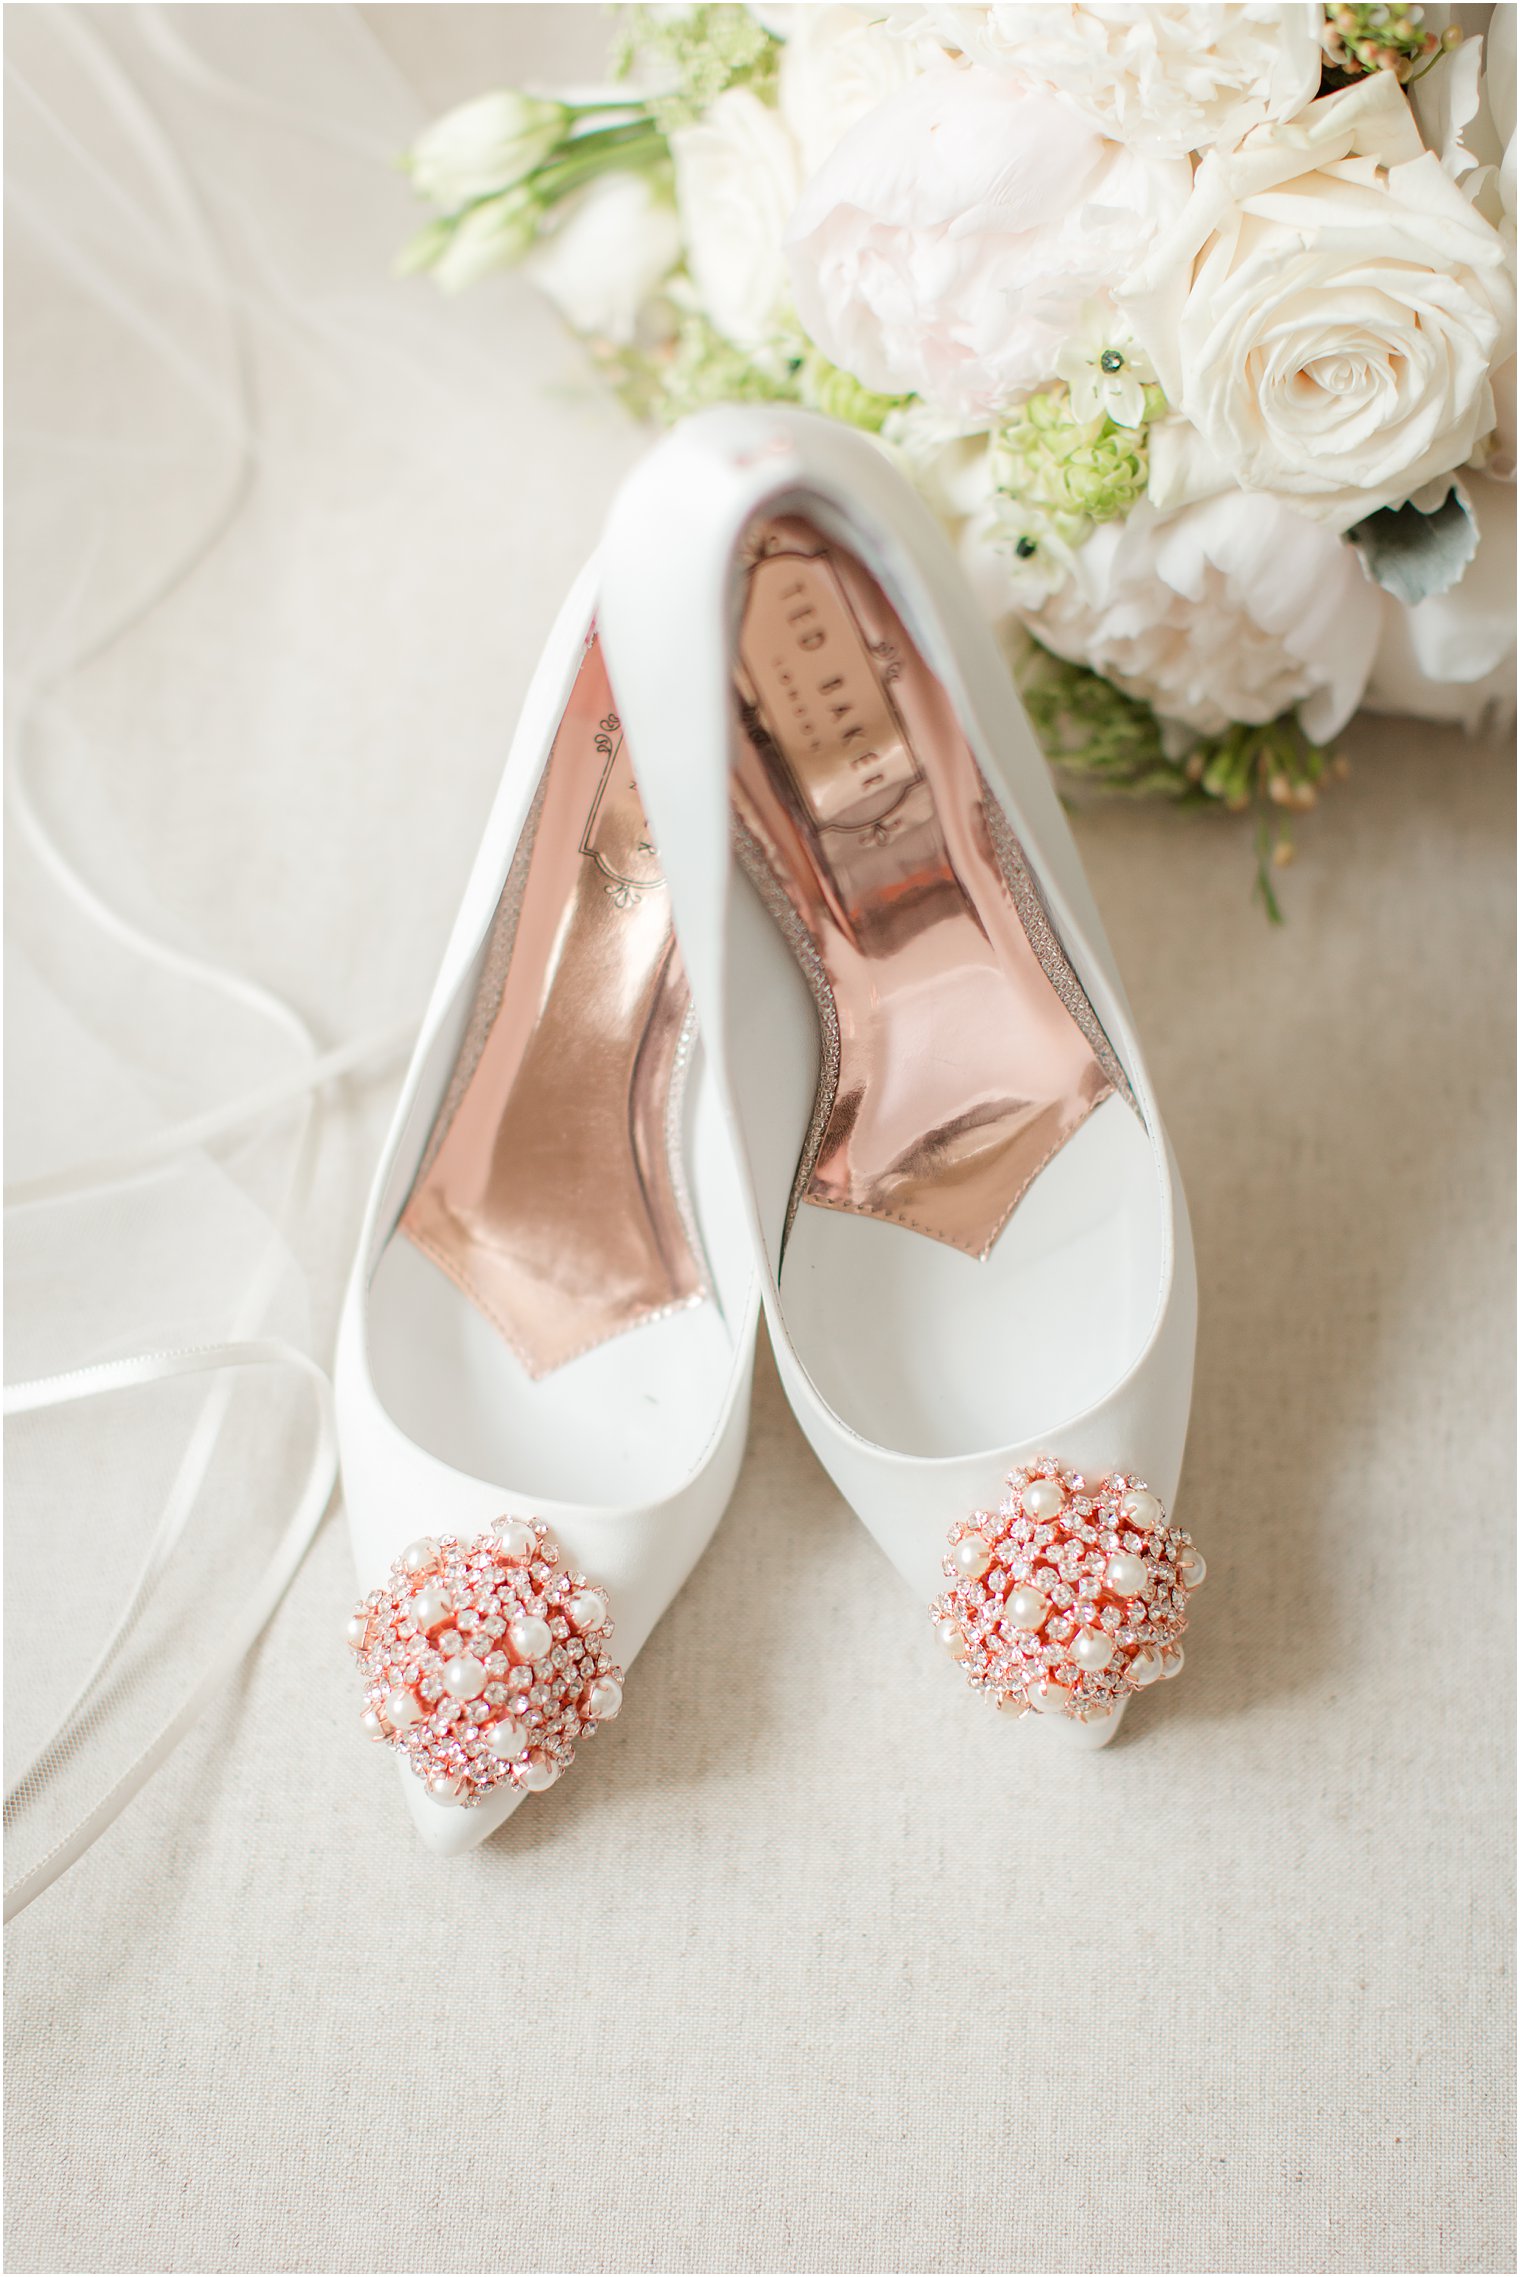 Ted Baker wedding shoes